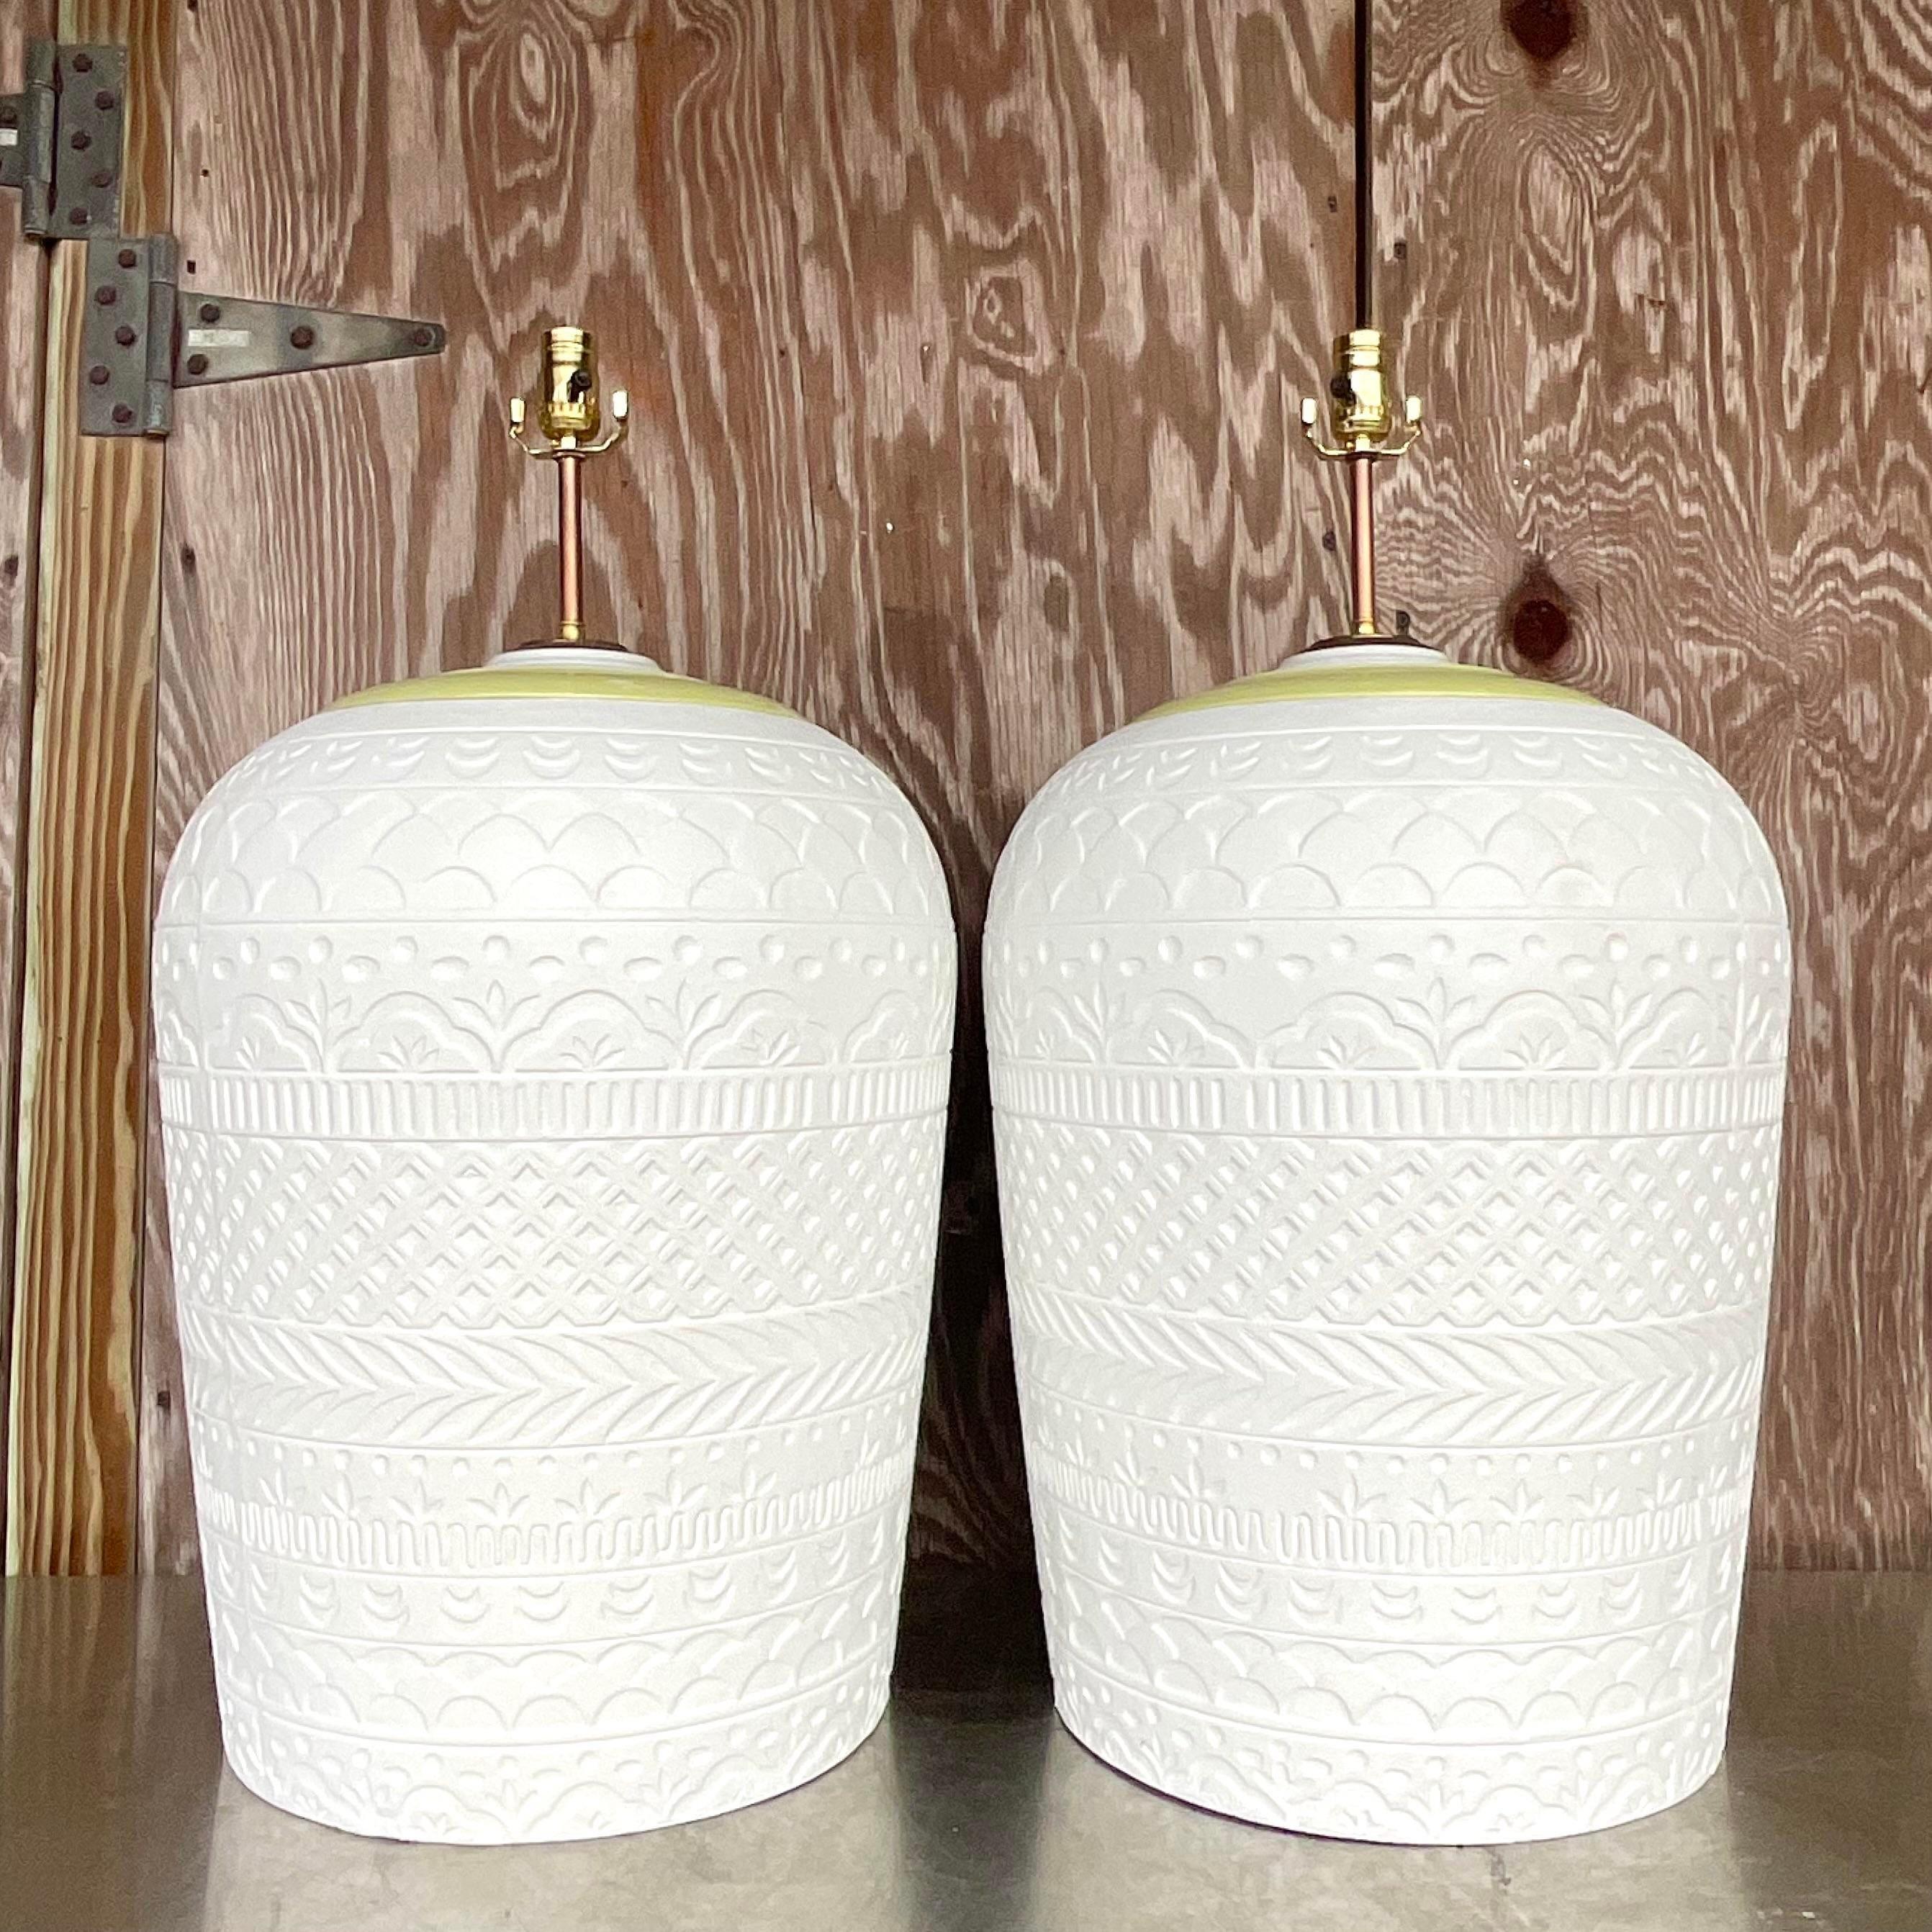 American Vintage Boho Monumental Plaster Relief Lamps - a Pair For Sale